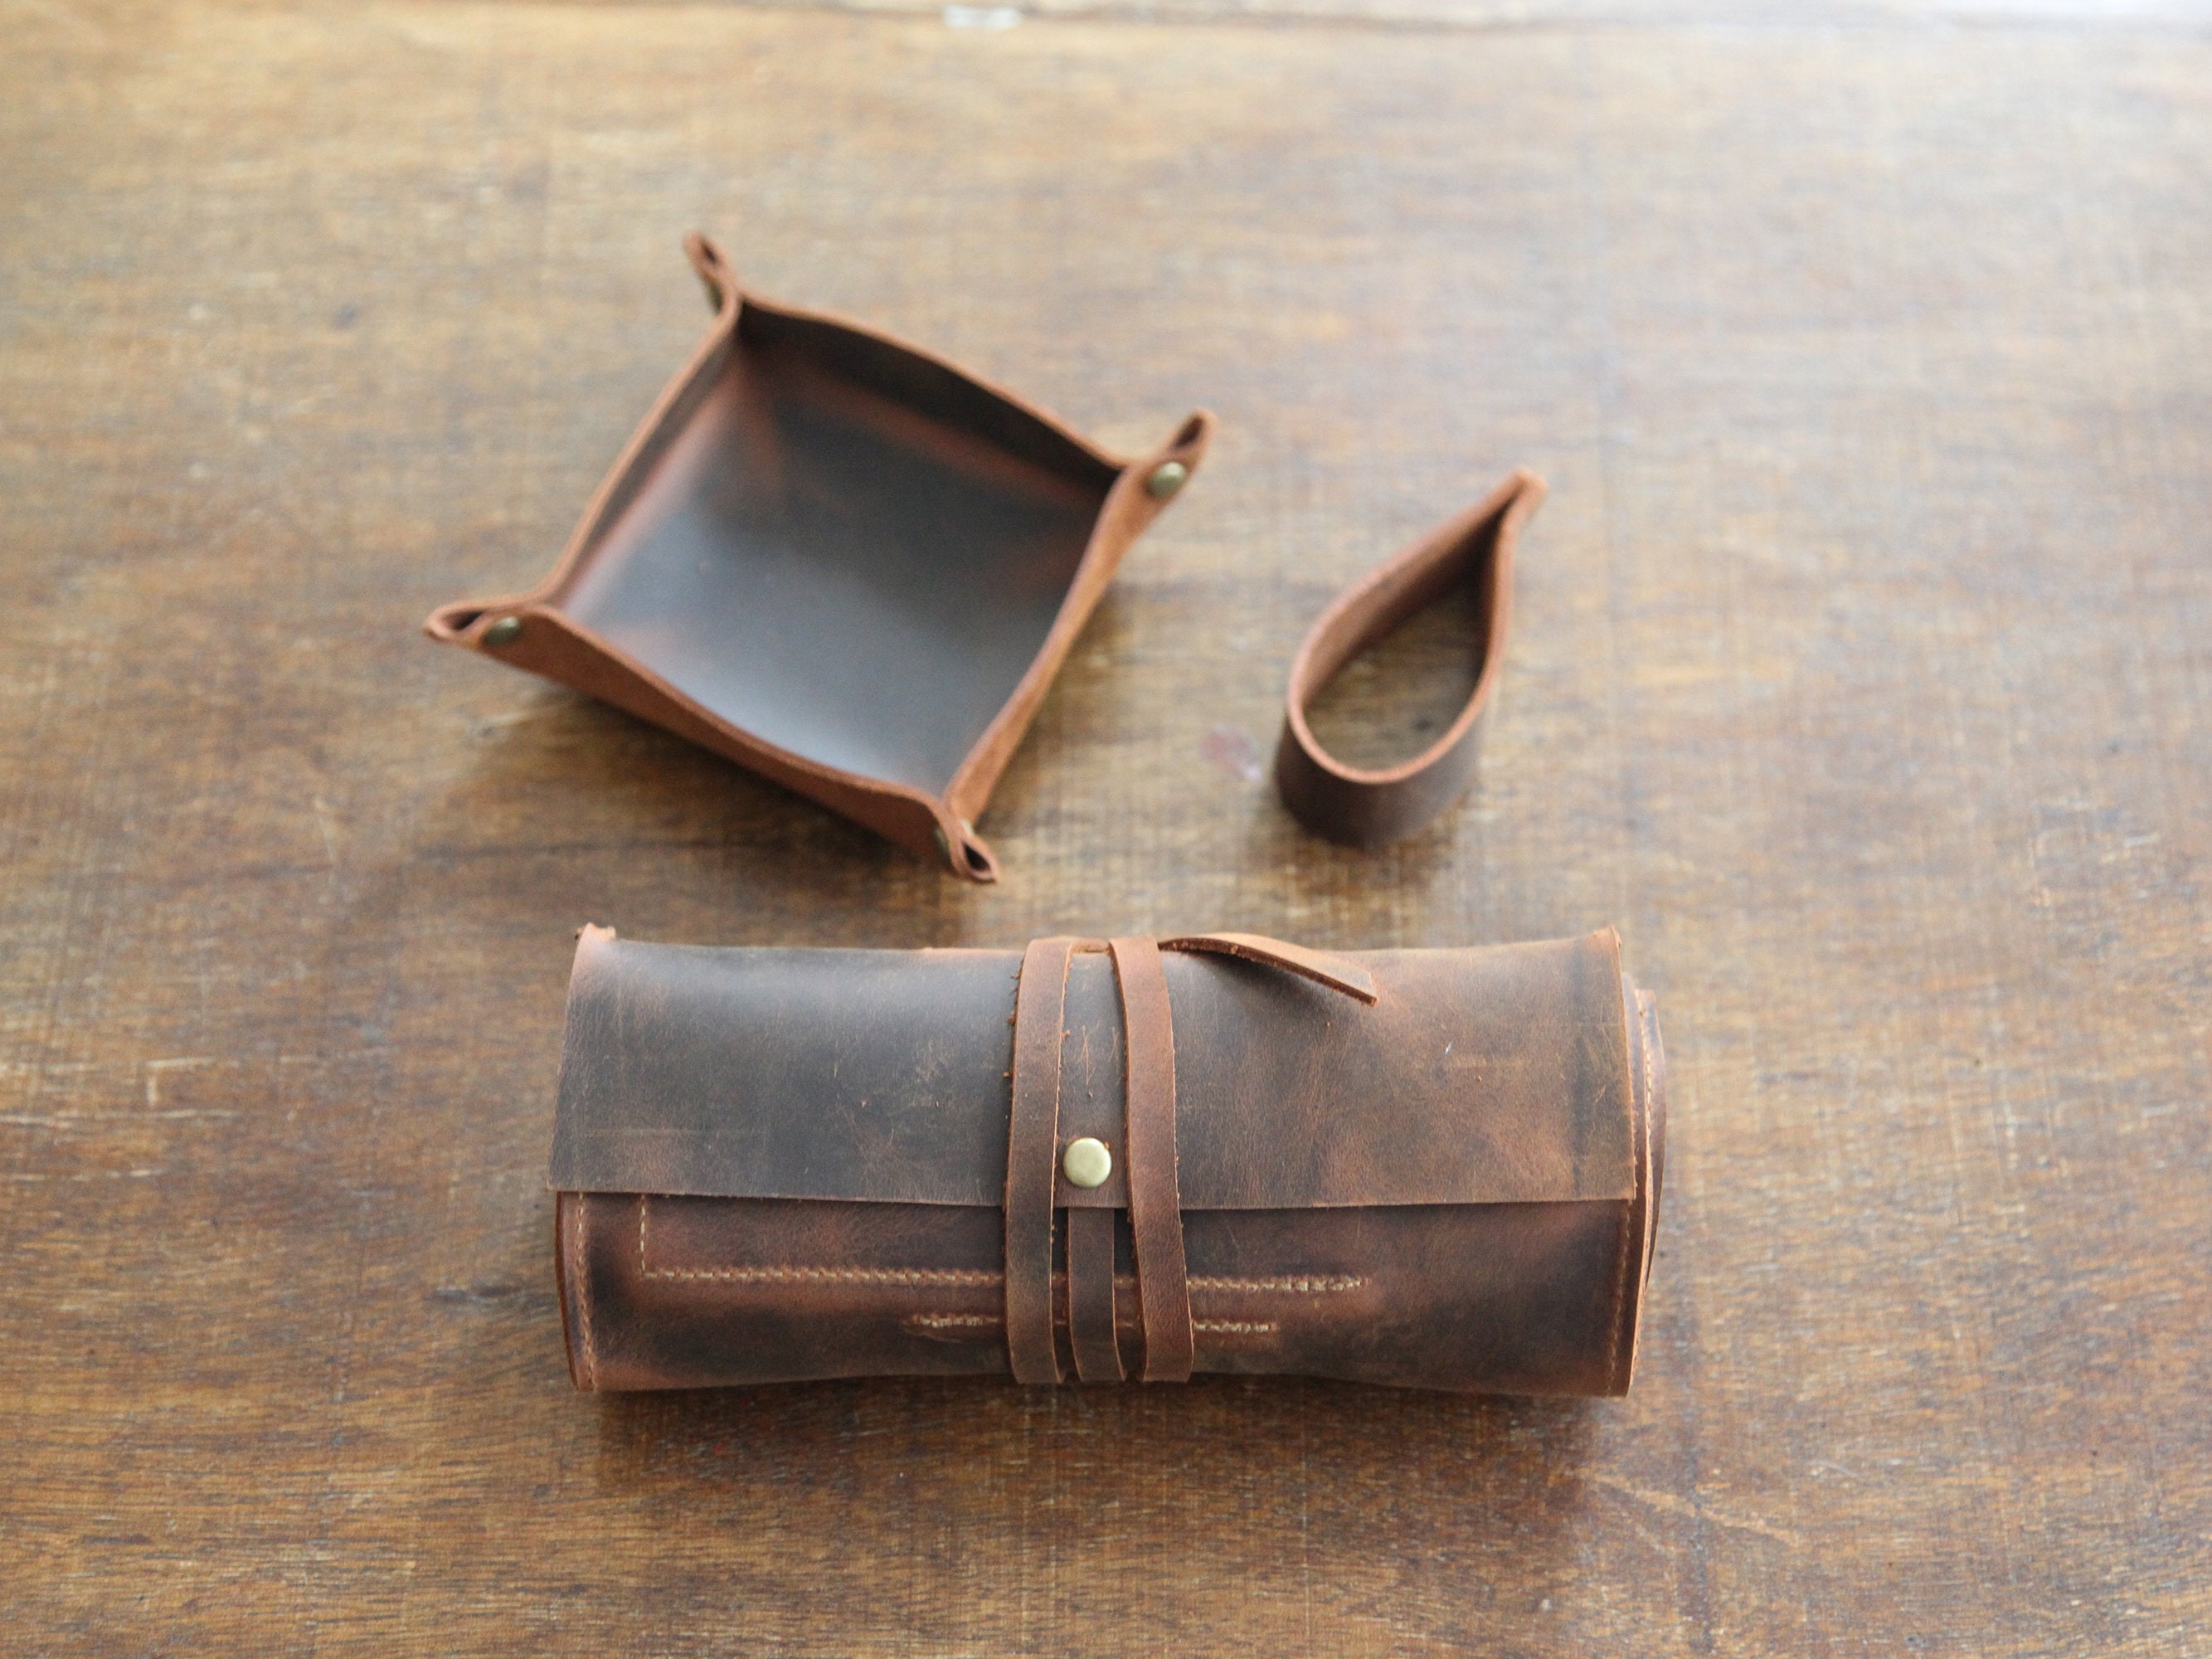 Elegant & Practical Leather Tobacco Pouch